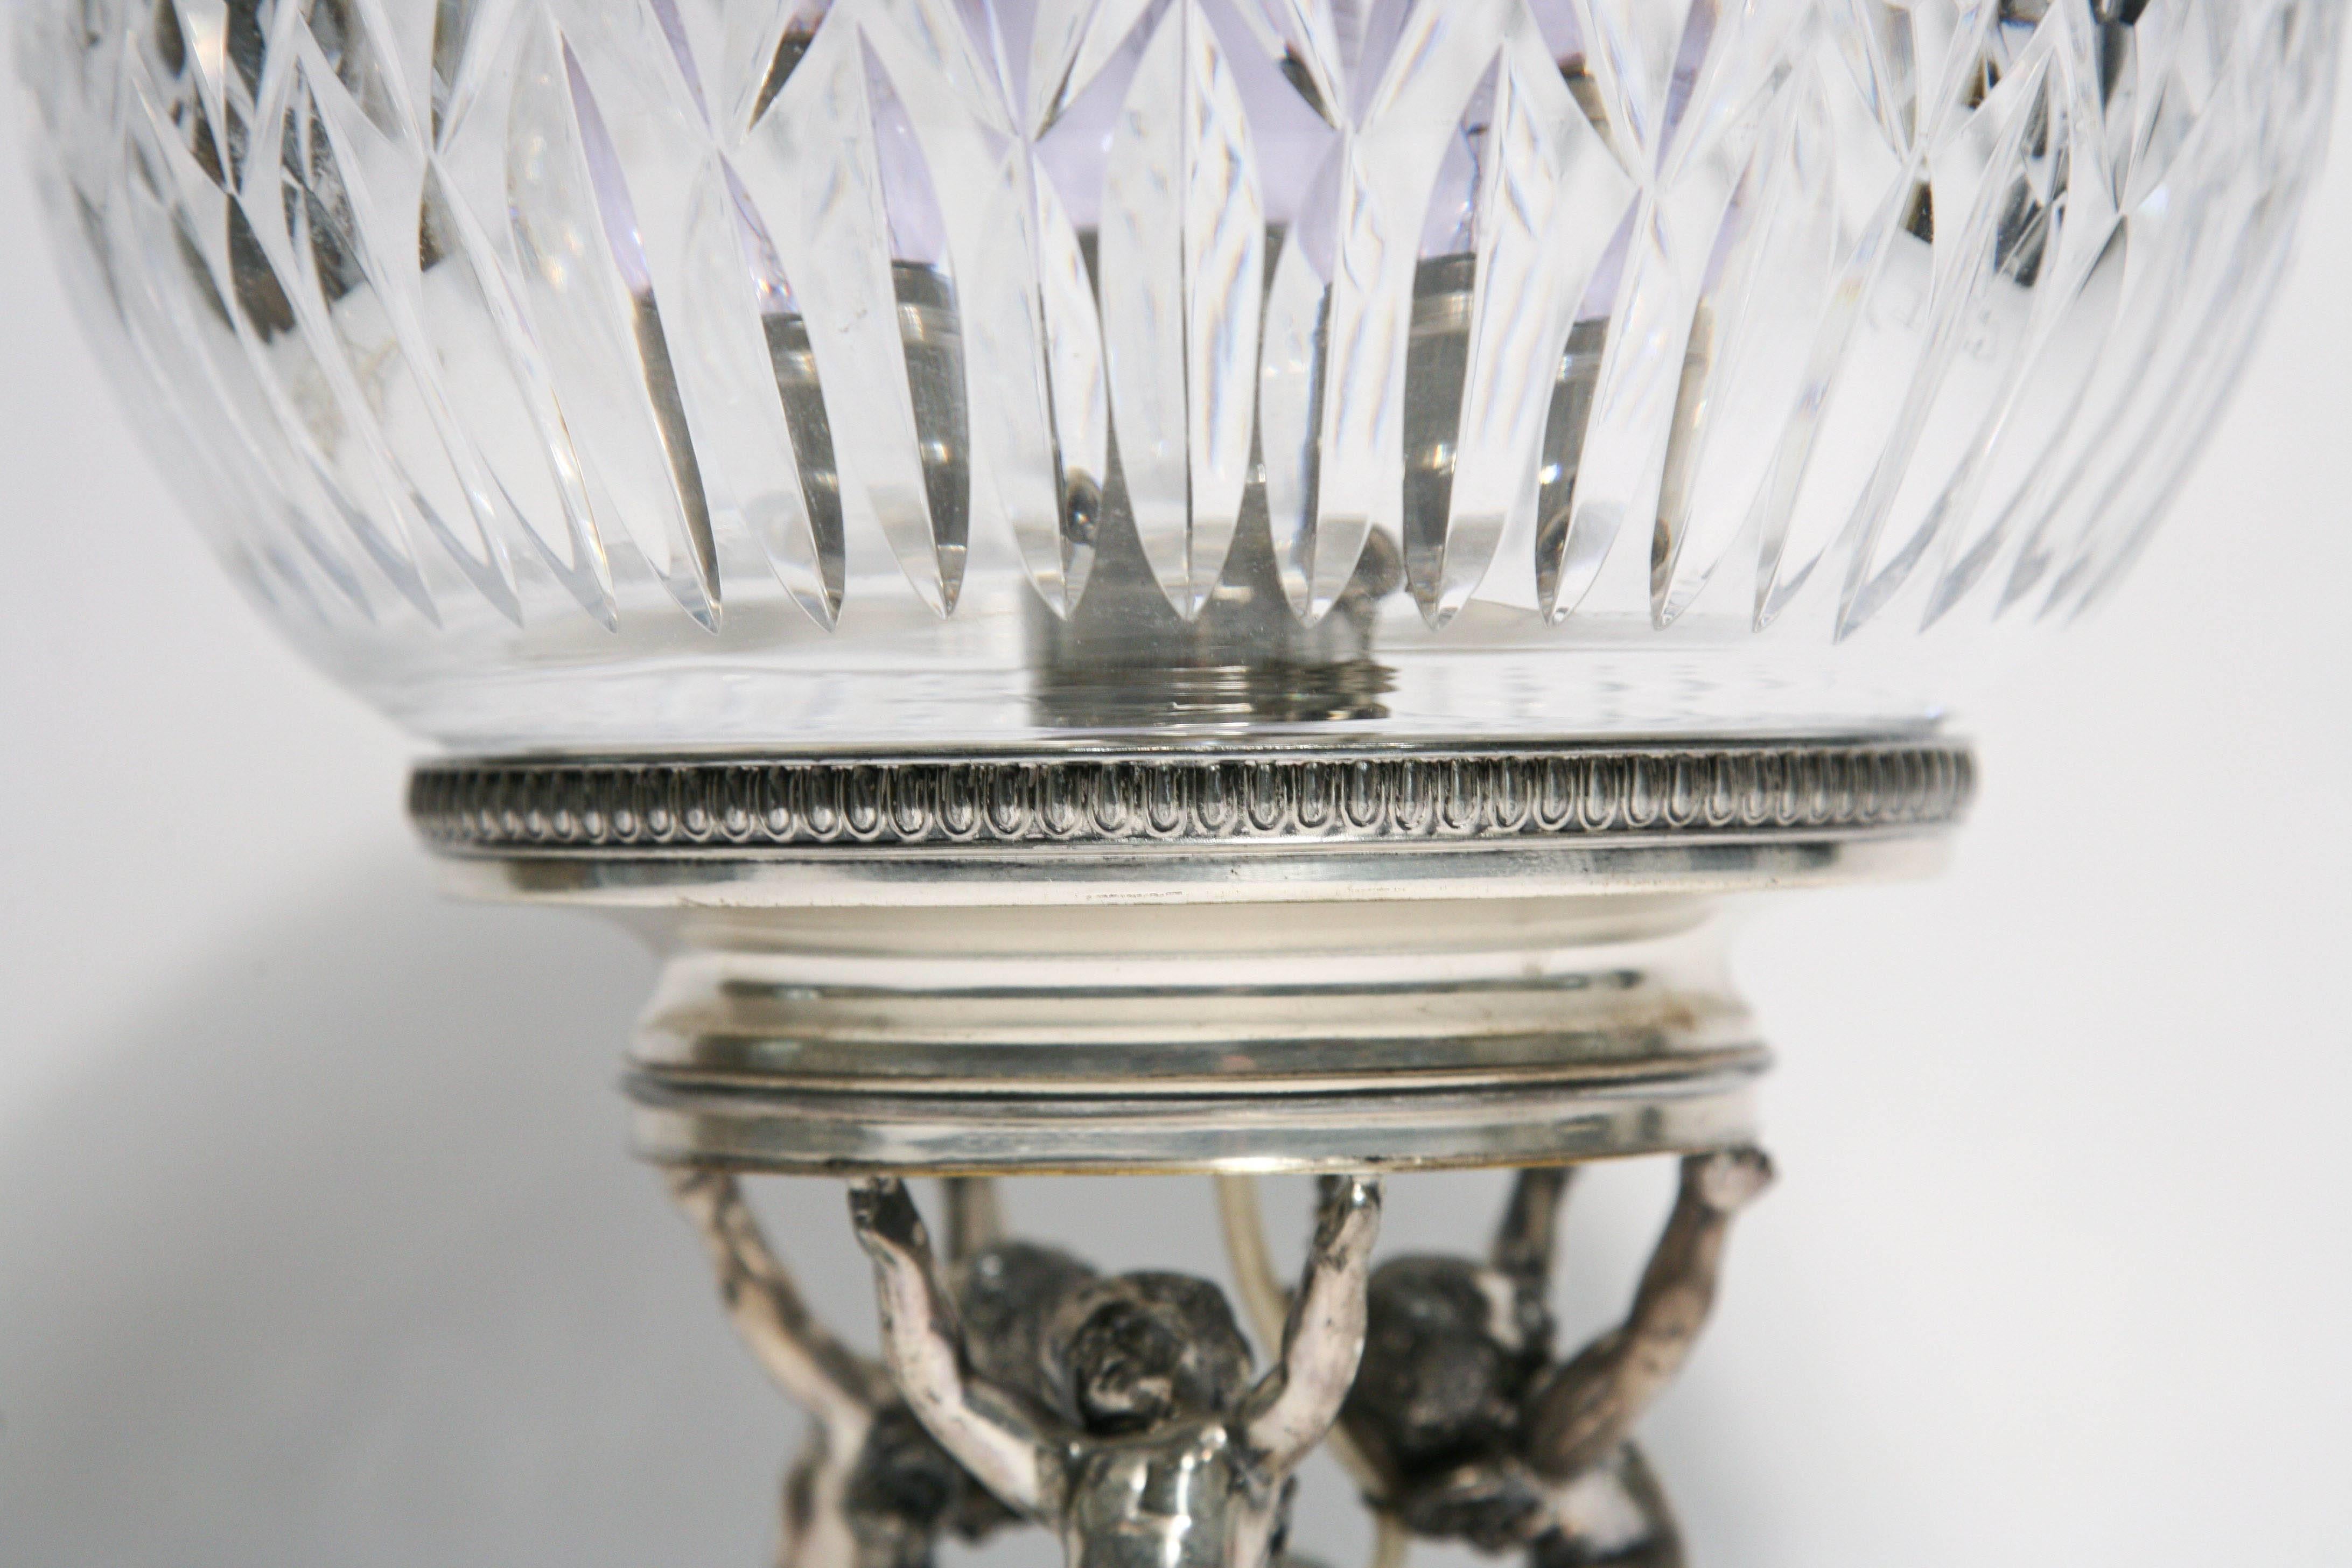 Early 20th Century Antique Crystal and Silver Plate Figural Desk or Table Light, Signed Pairpoint